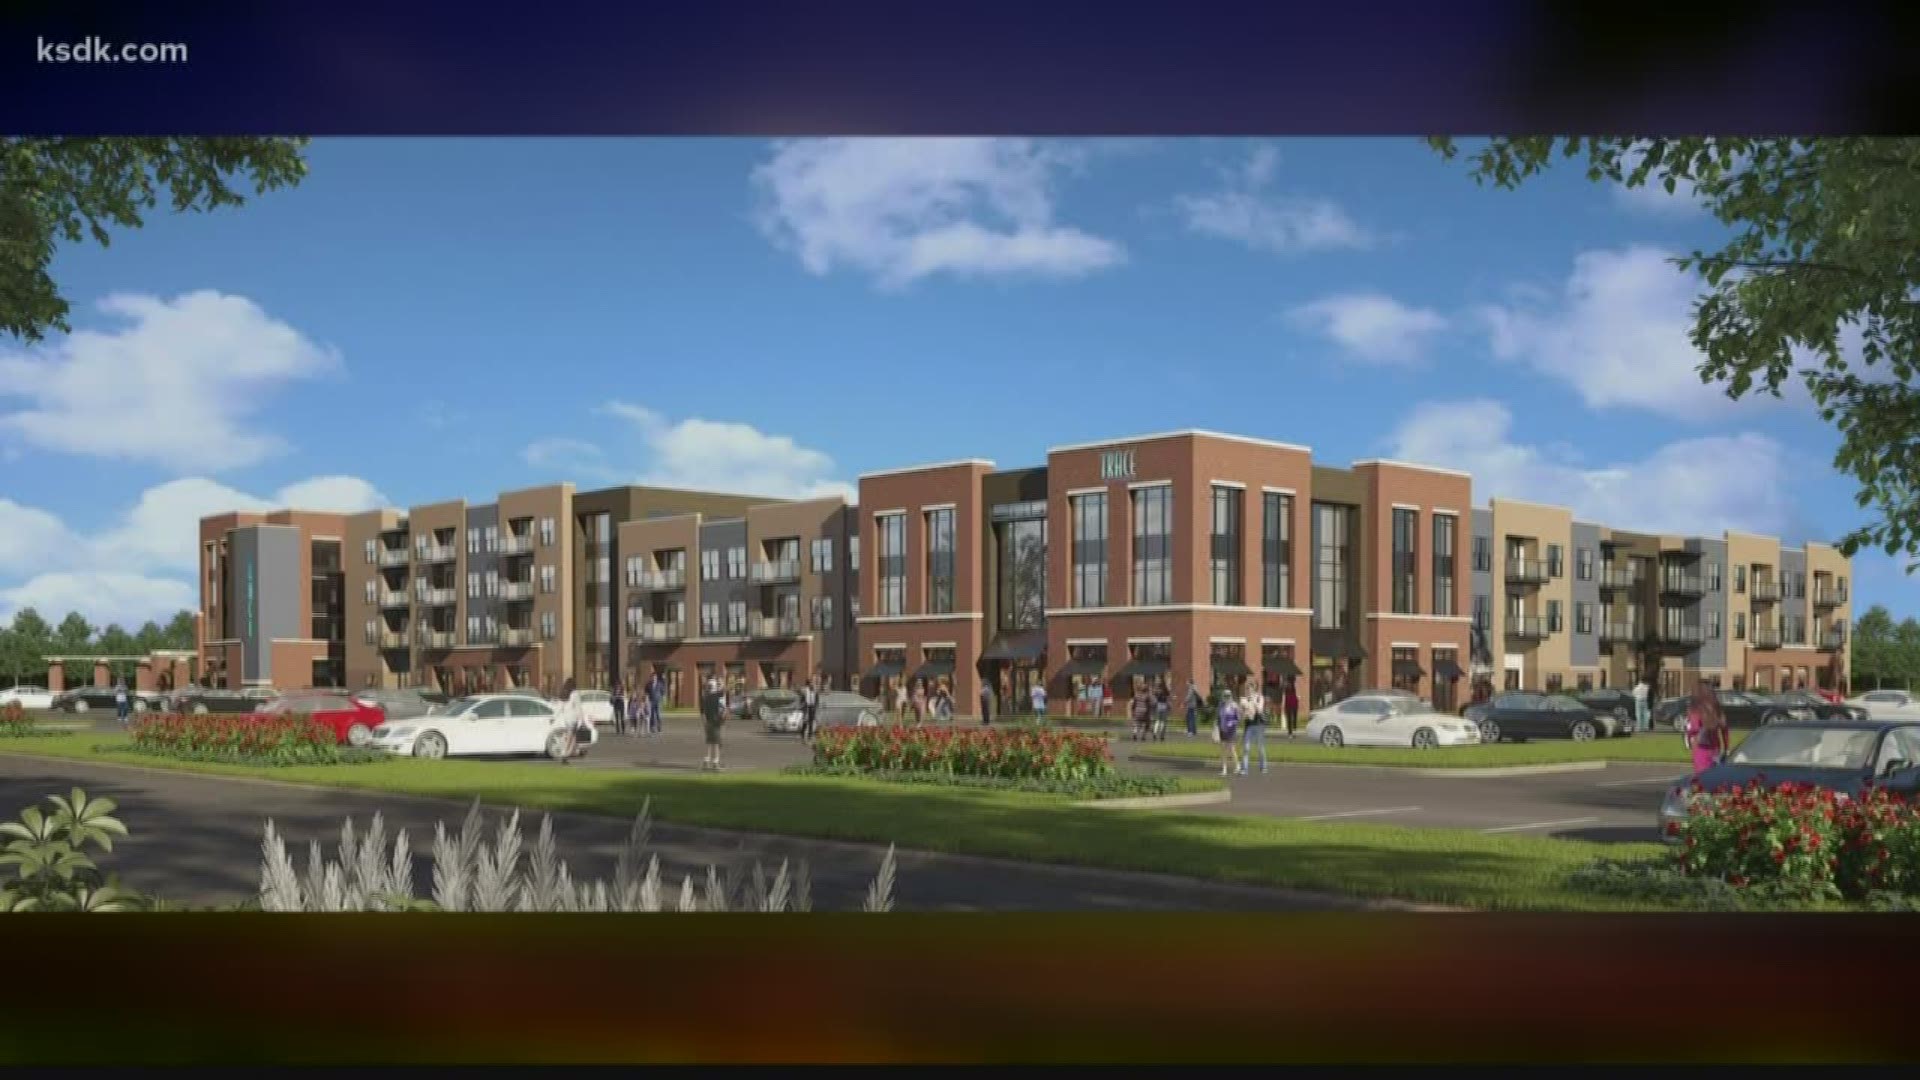 Check out a new luxury living complex coming to Edwardsville in 2020.